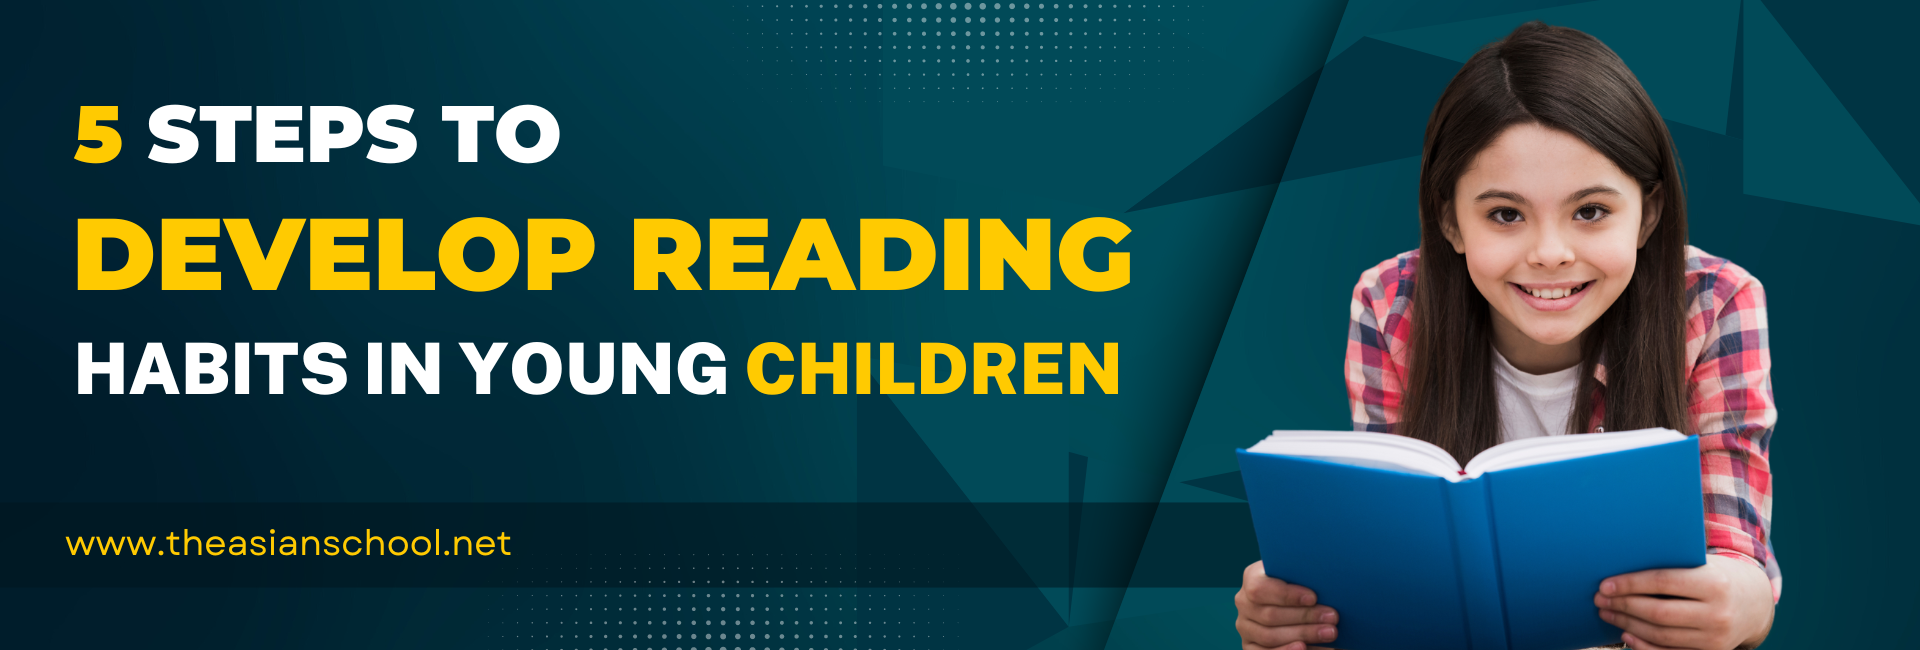 5 Steps To Develop Reading Habits In Young Children